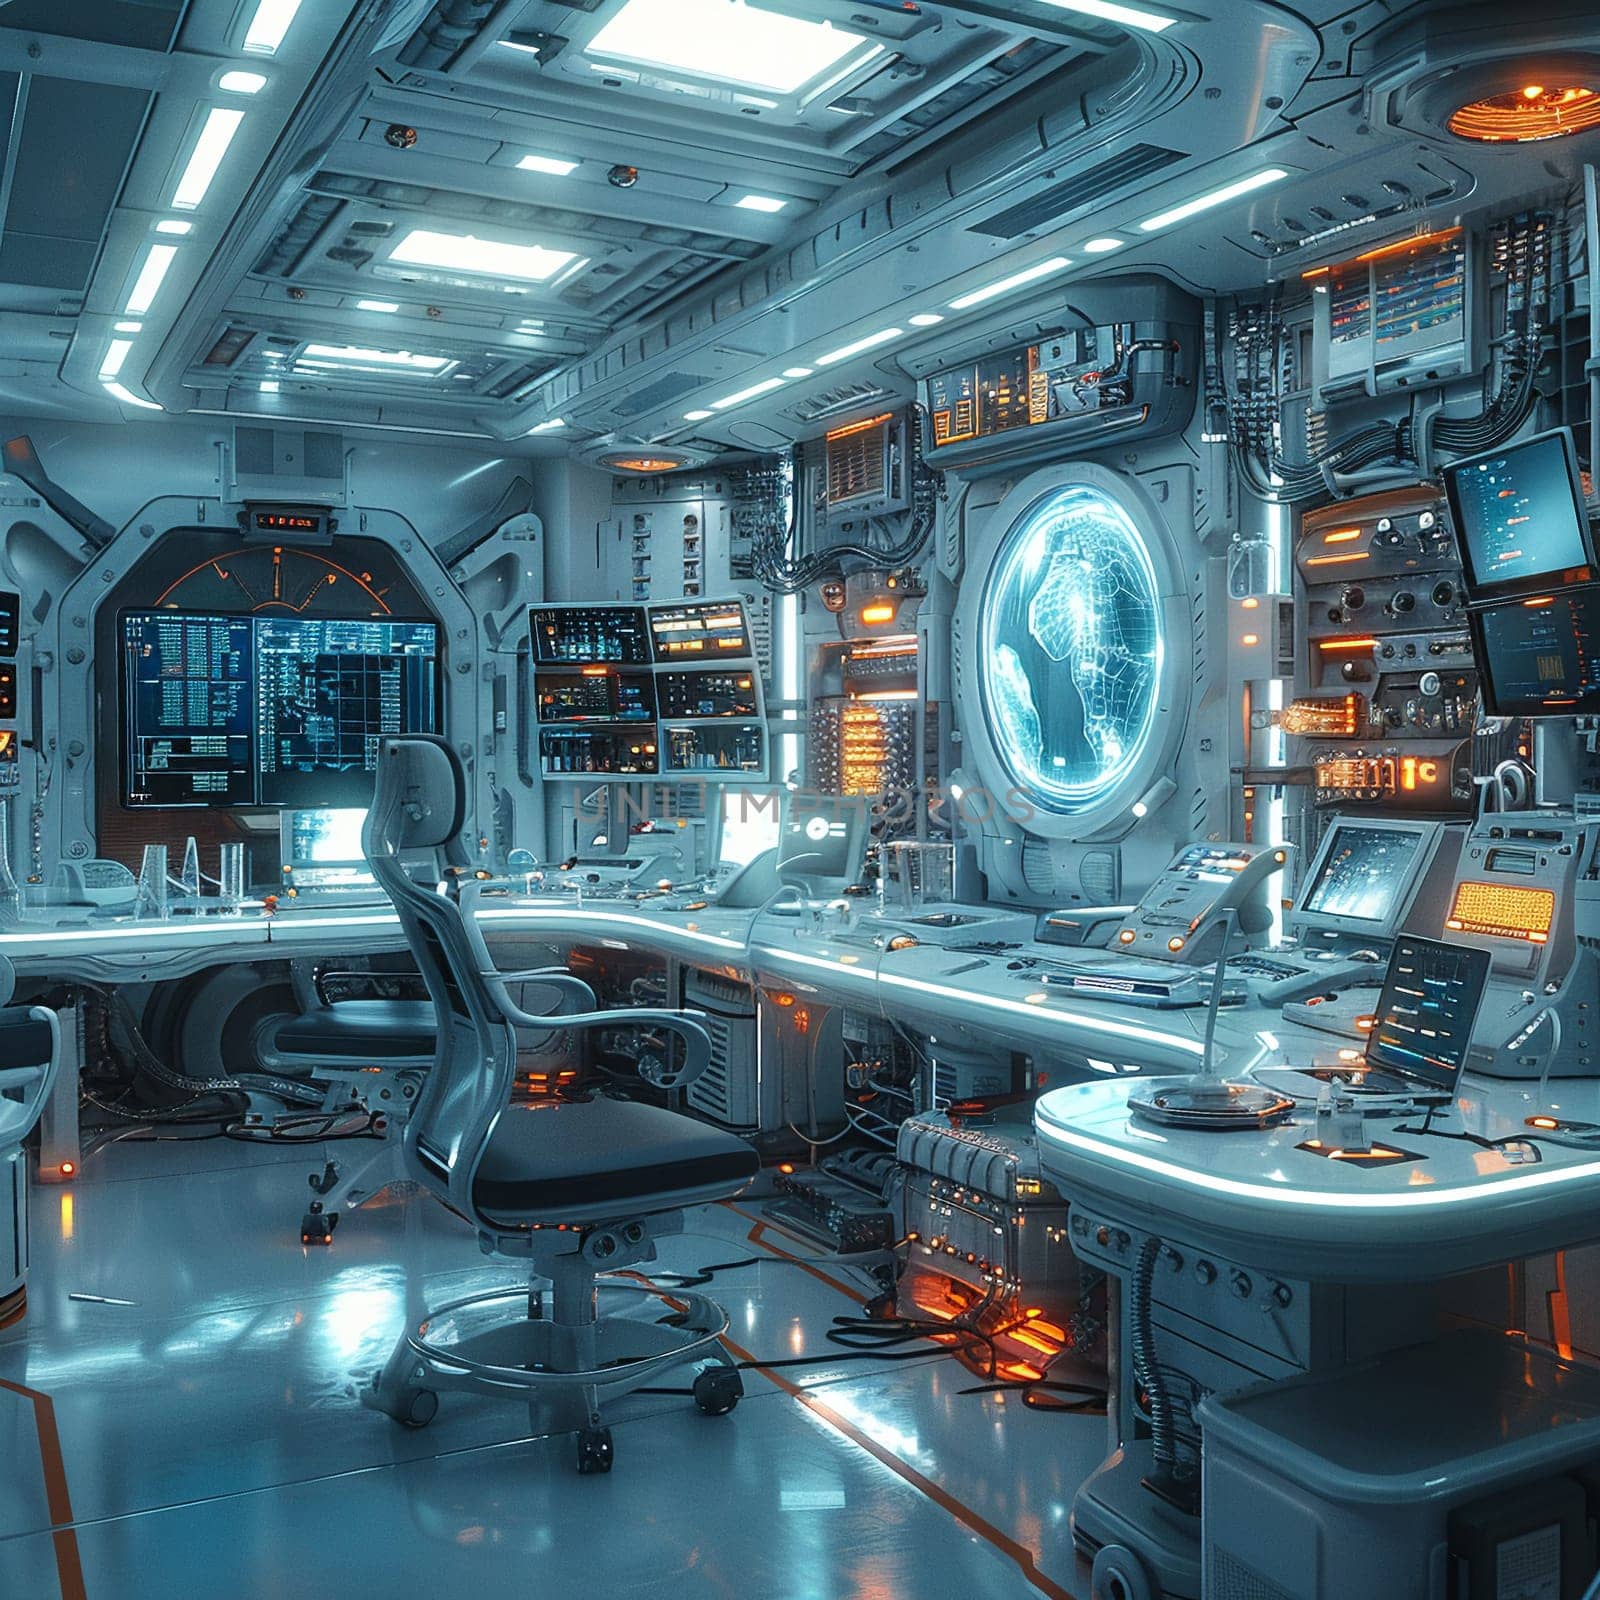 Futuristic lab with holographic interfaces, rendered in a sleek, high-tech digital art style.